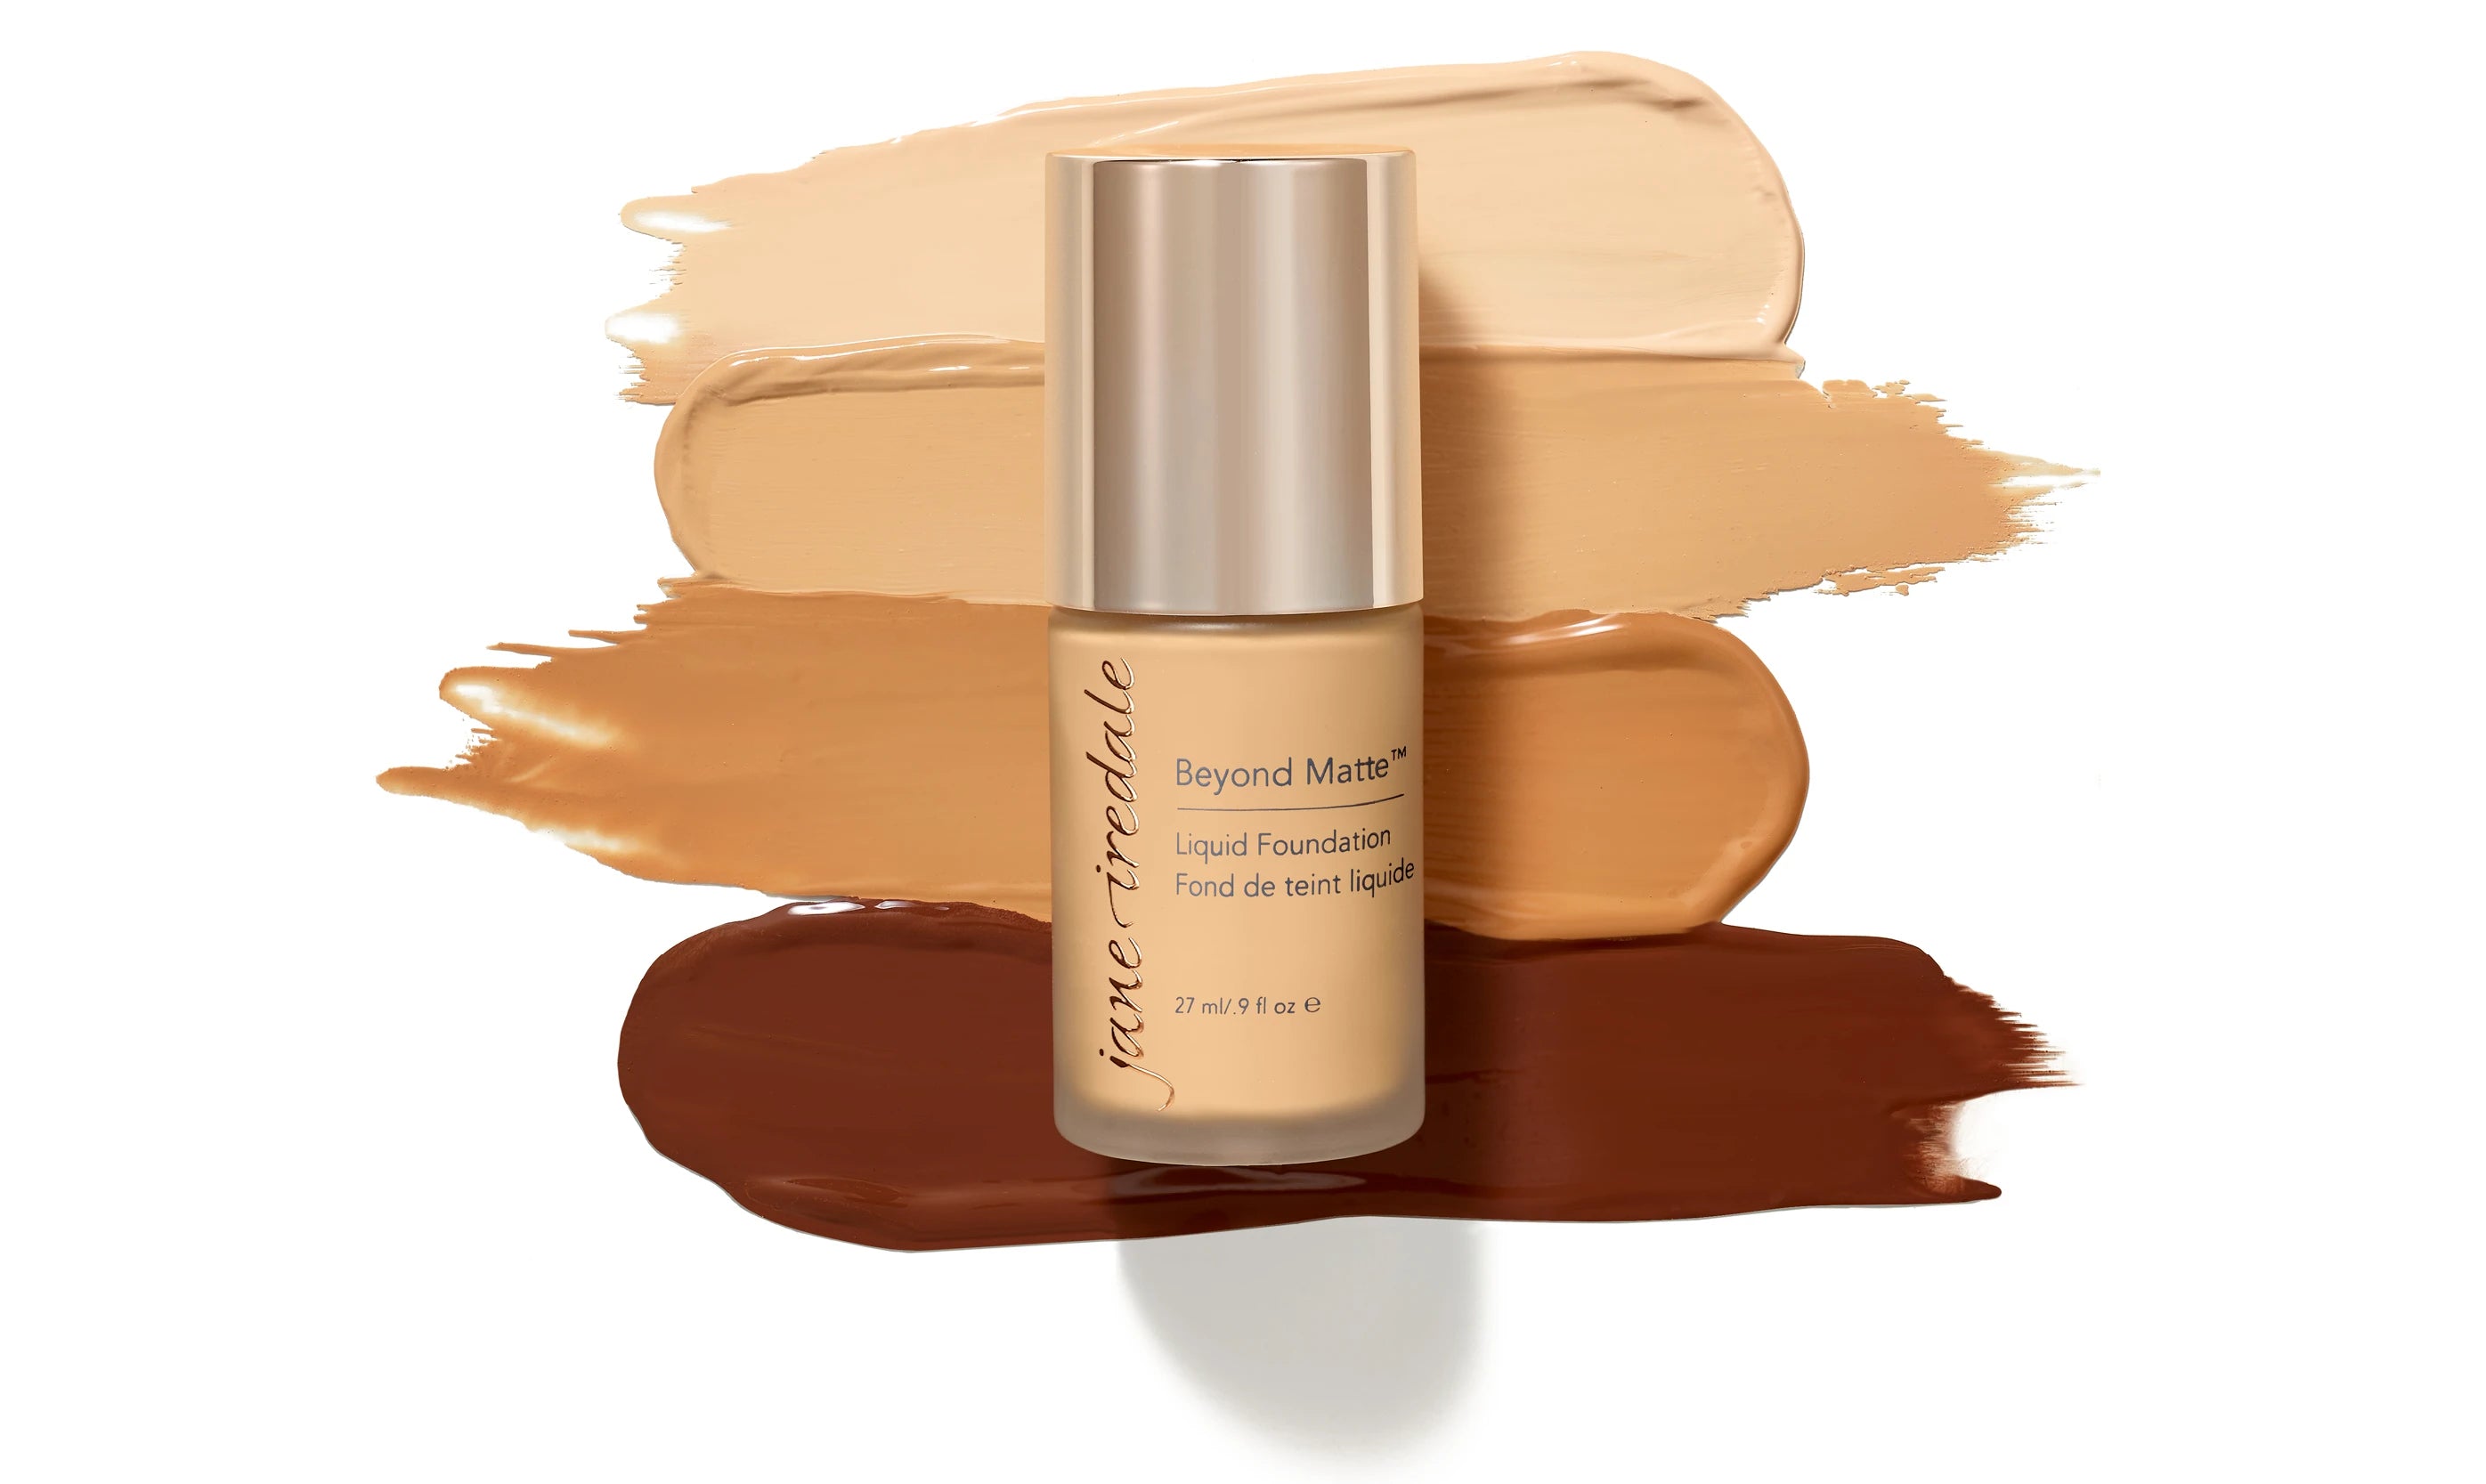 jane iredale Beyond Matte Liquid Foundation for oily skin types